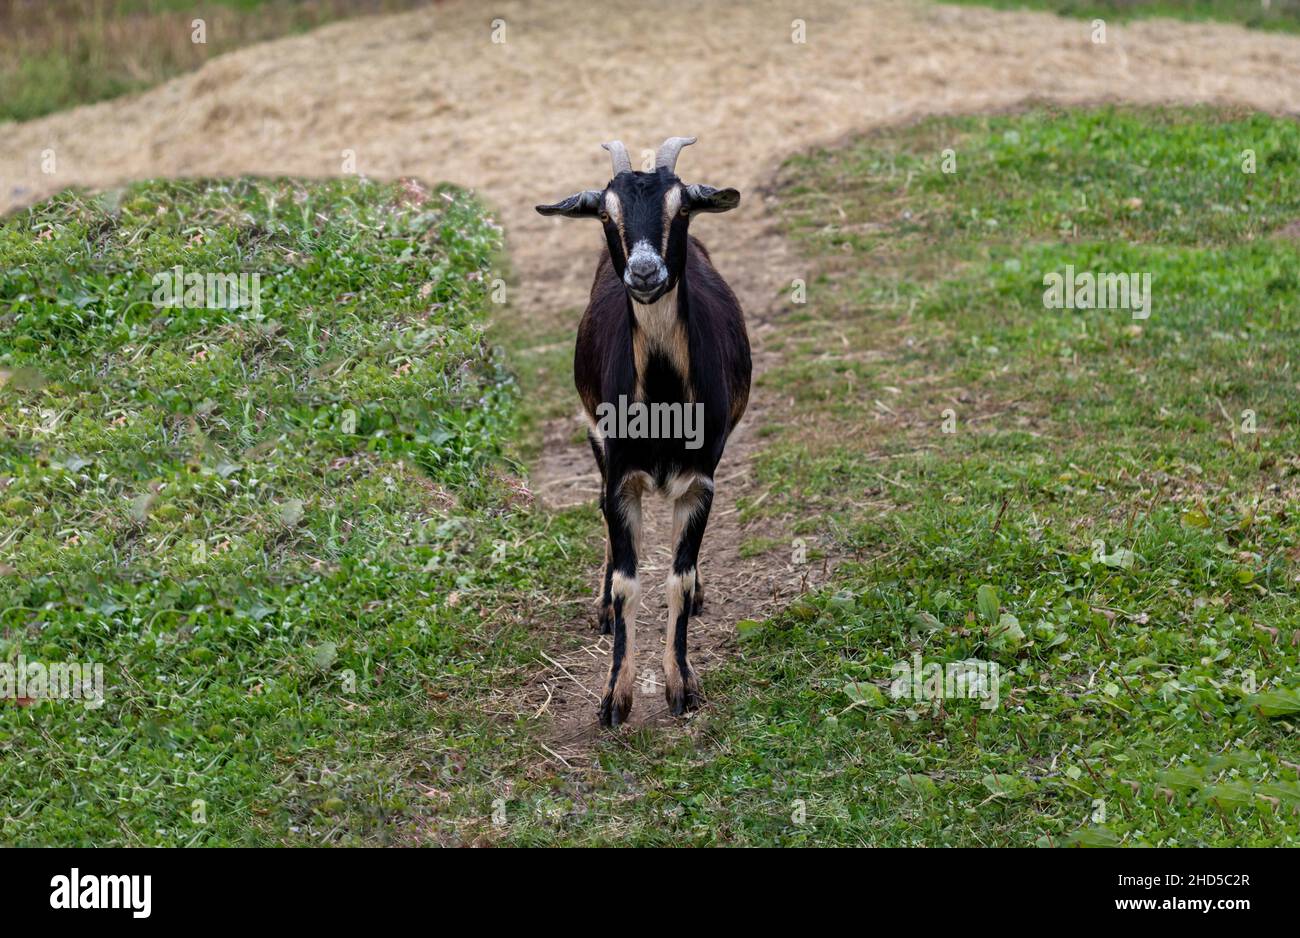 Black and Tan goat closeup standing in grass field Stock Photo